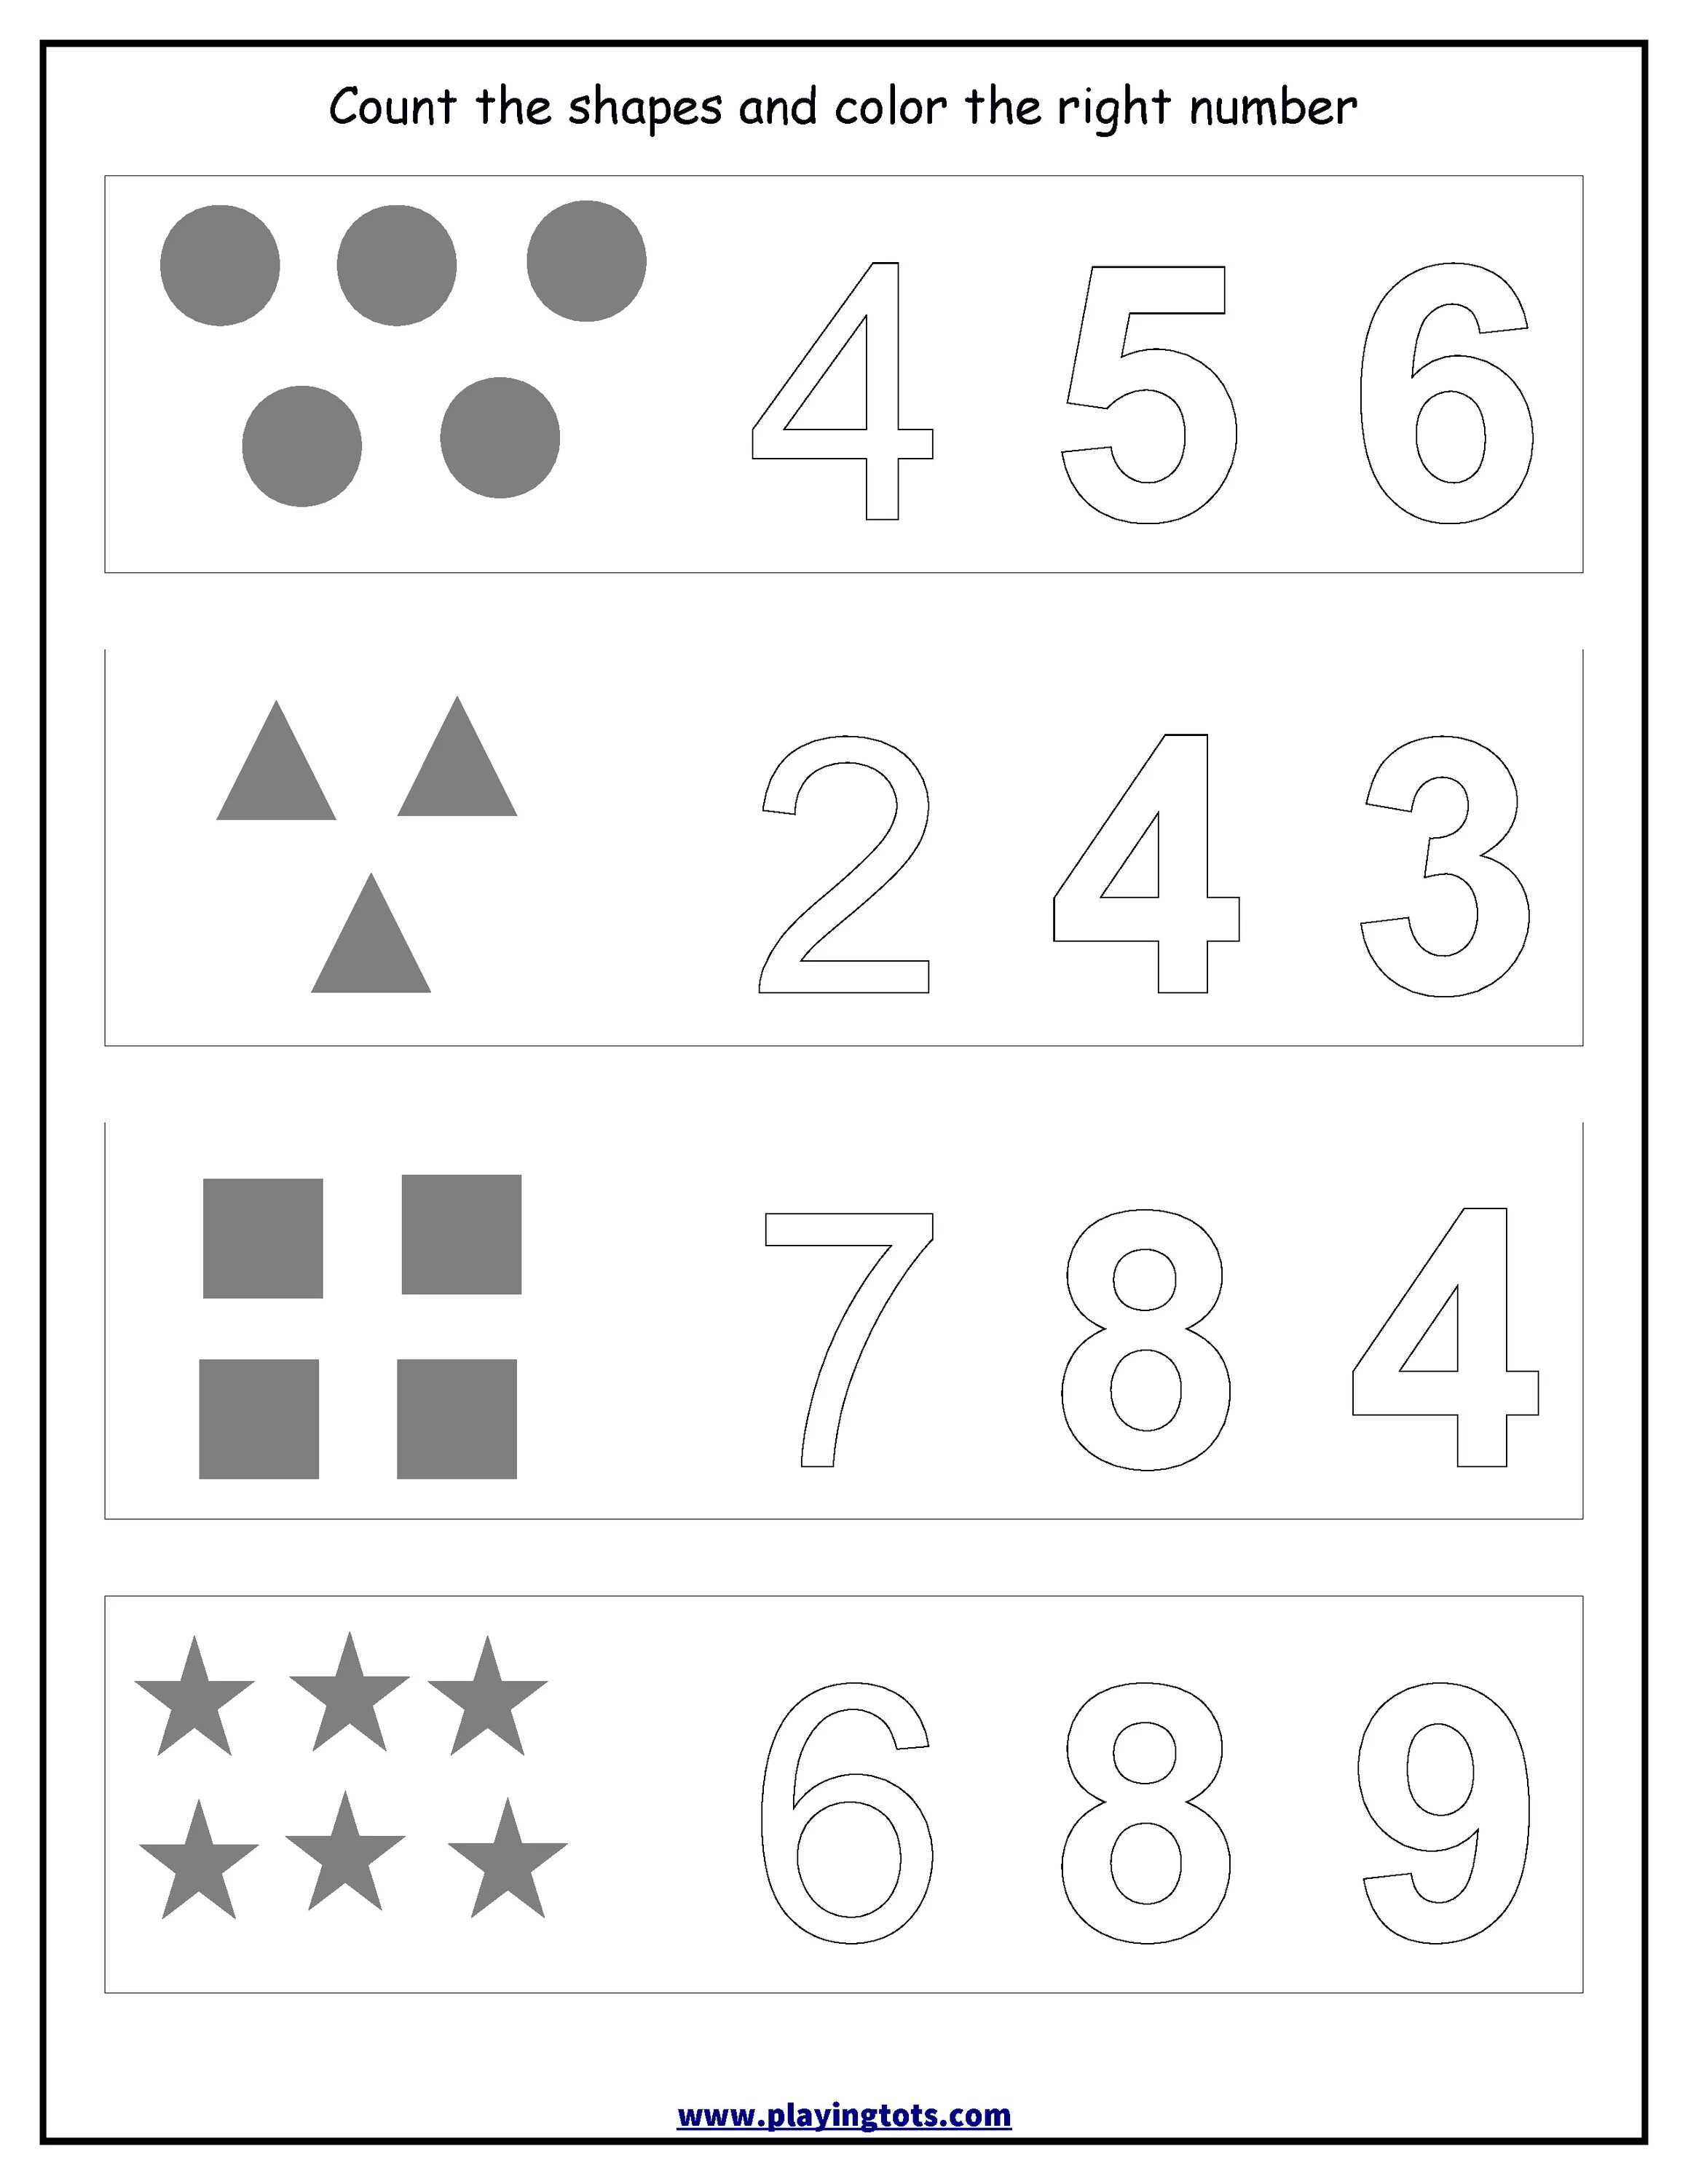 Shape matching. Count Shapes. Count Shapes Worksheet. Shapes and numbers. Count Shapes for Kids.